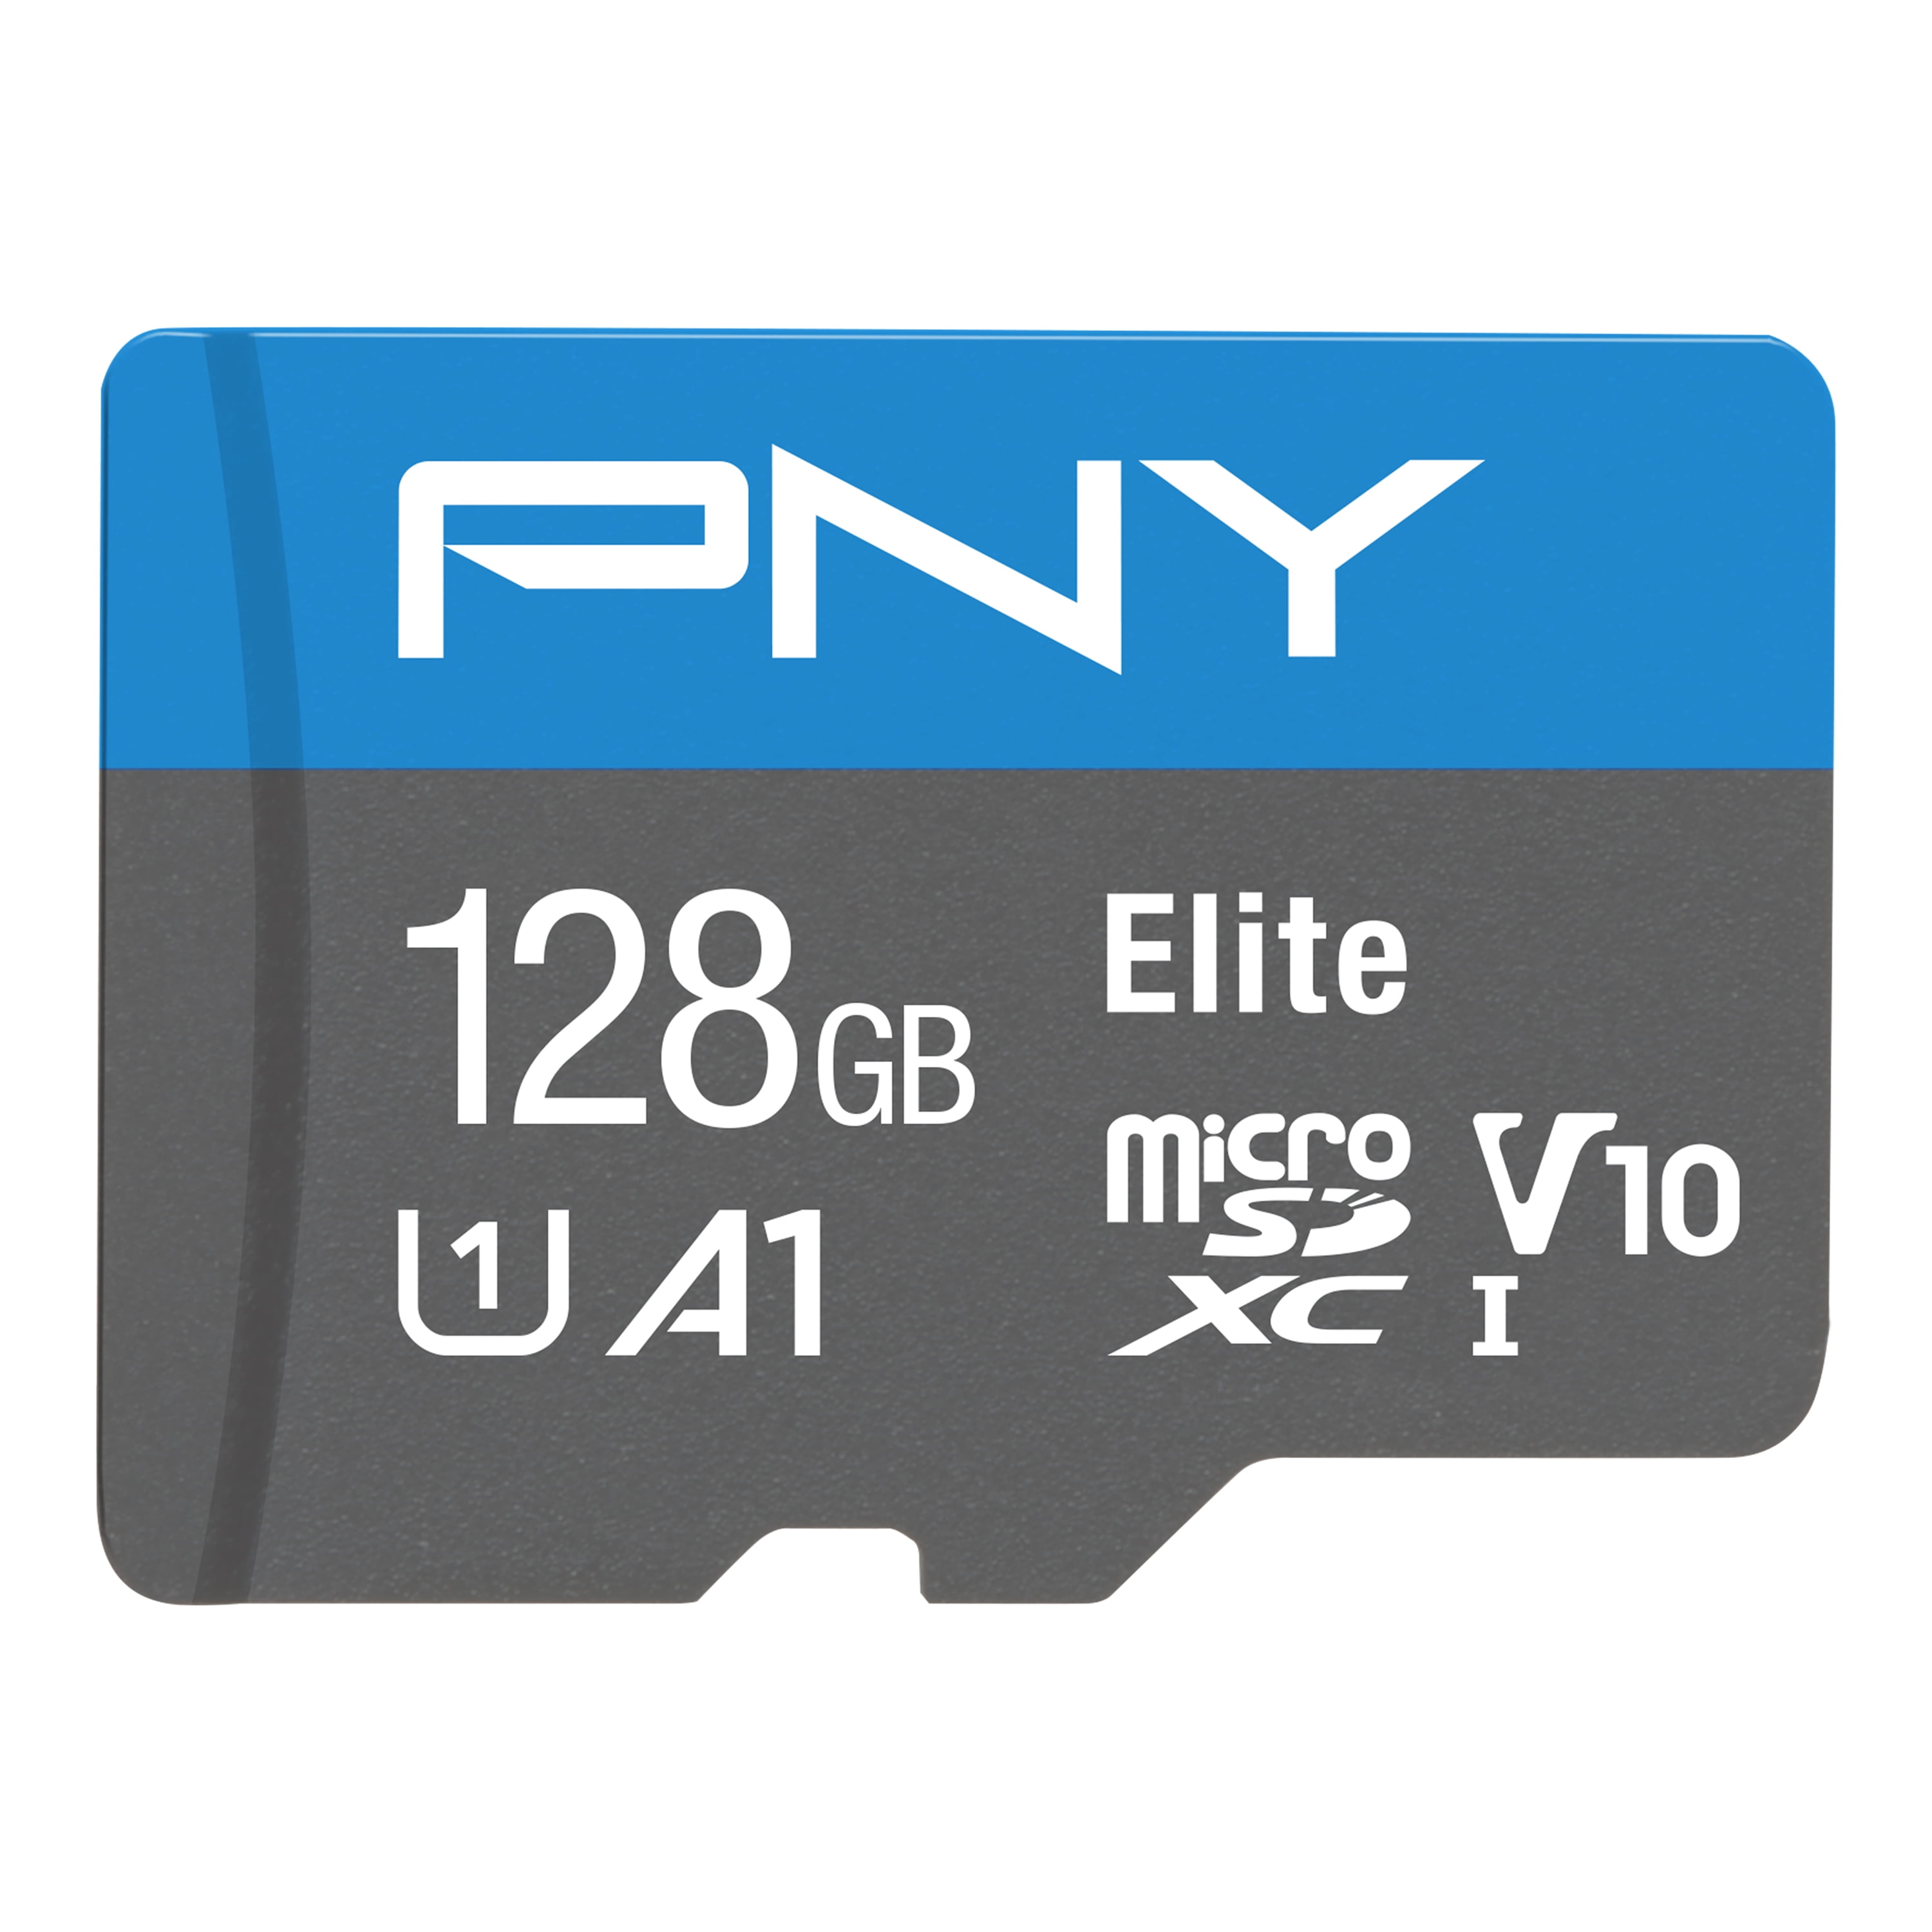 PNY 128GB Elite Class 10 U1 microSDHC Flash Memory Card  for Mobile Devices - 100MB/s, Class 10, U1, V10, A1, Full HD, UHS-I, micro SD